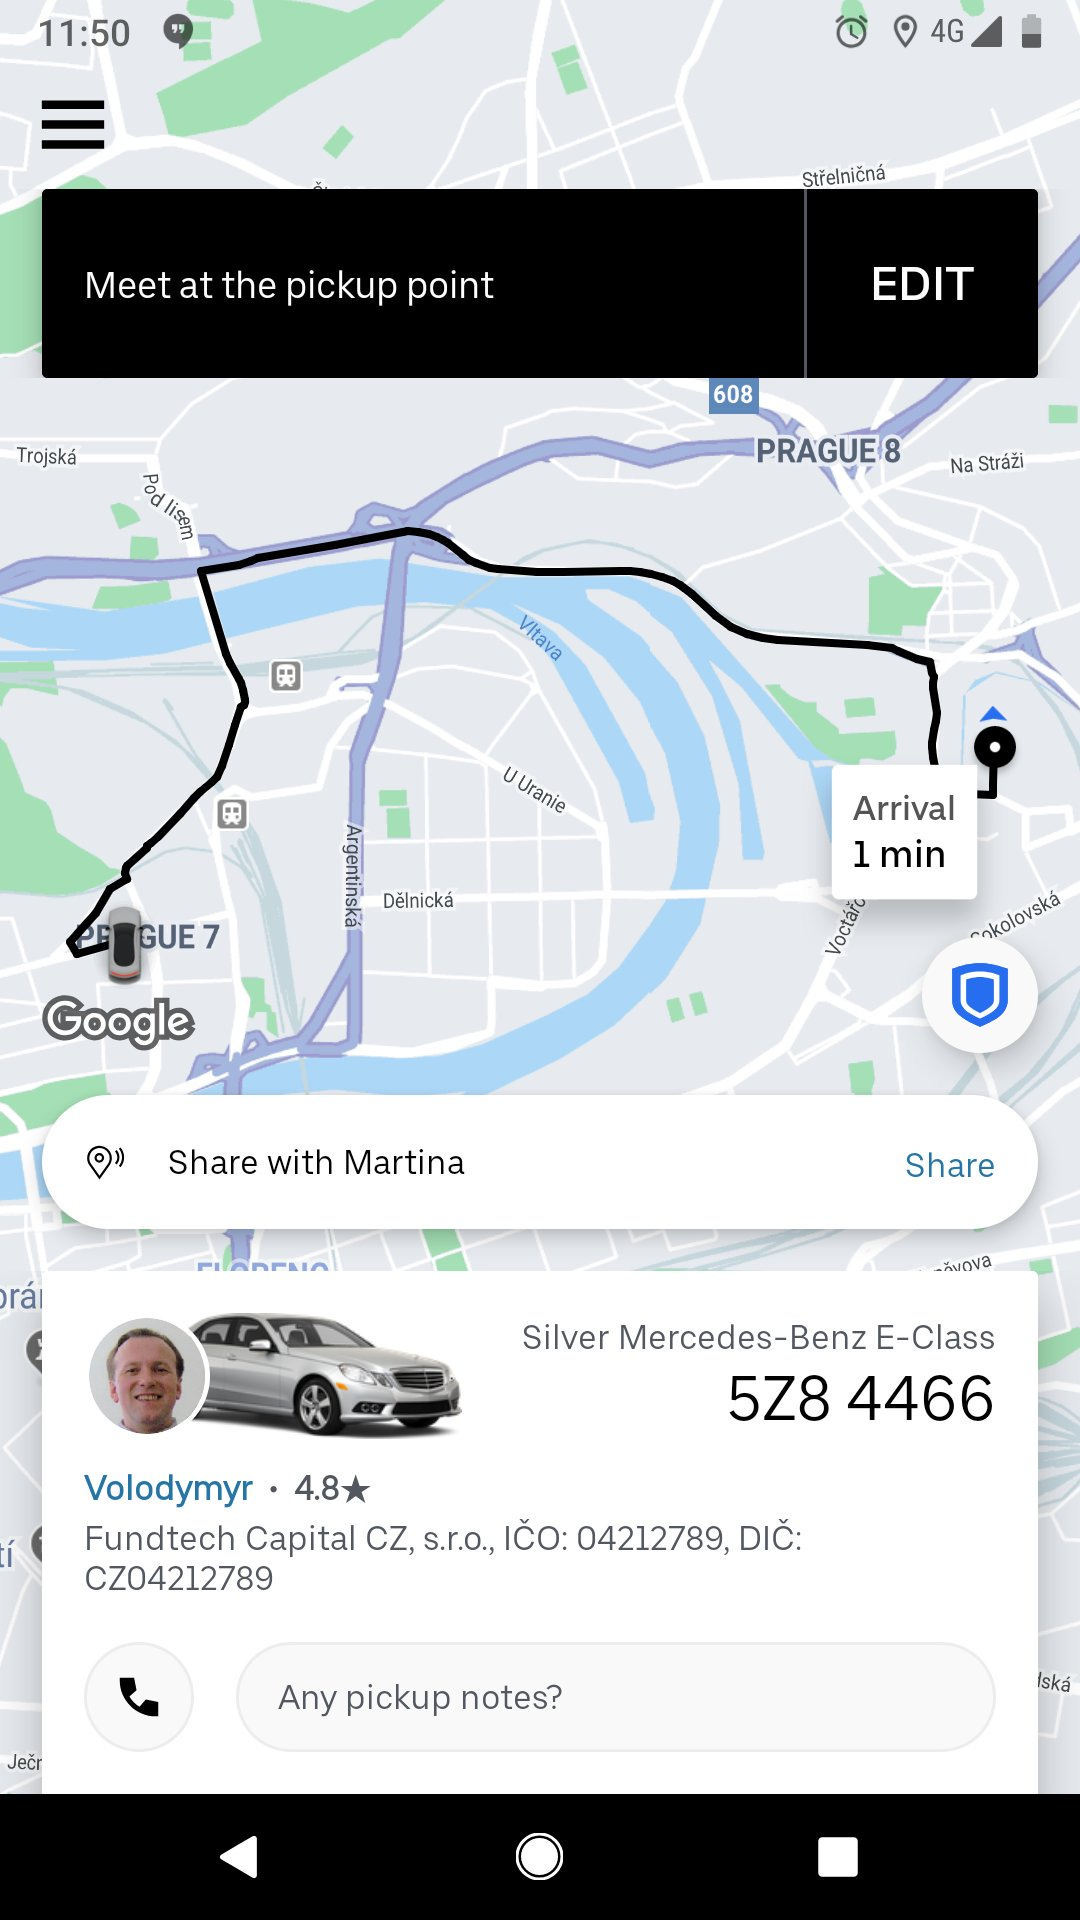 Pavel Jašek on X: "Uber time management: show "1 minute arrival" estimate  for a 6+ minute ride, and don't change it for 16 minutes.  https://t.co/uXcaVEBA8a" / X